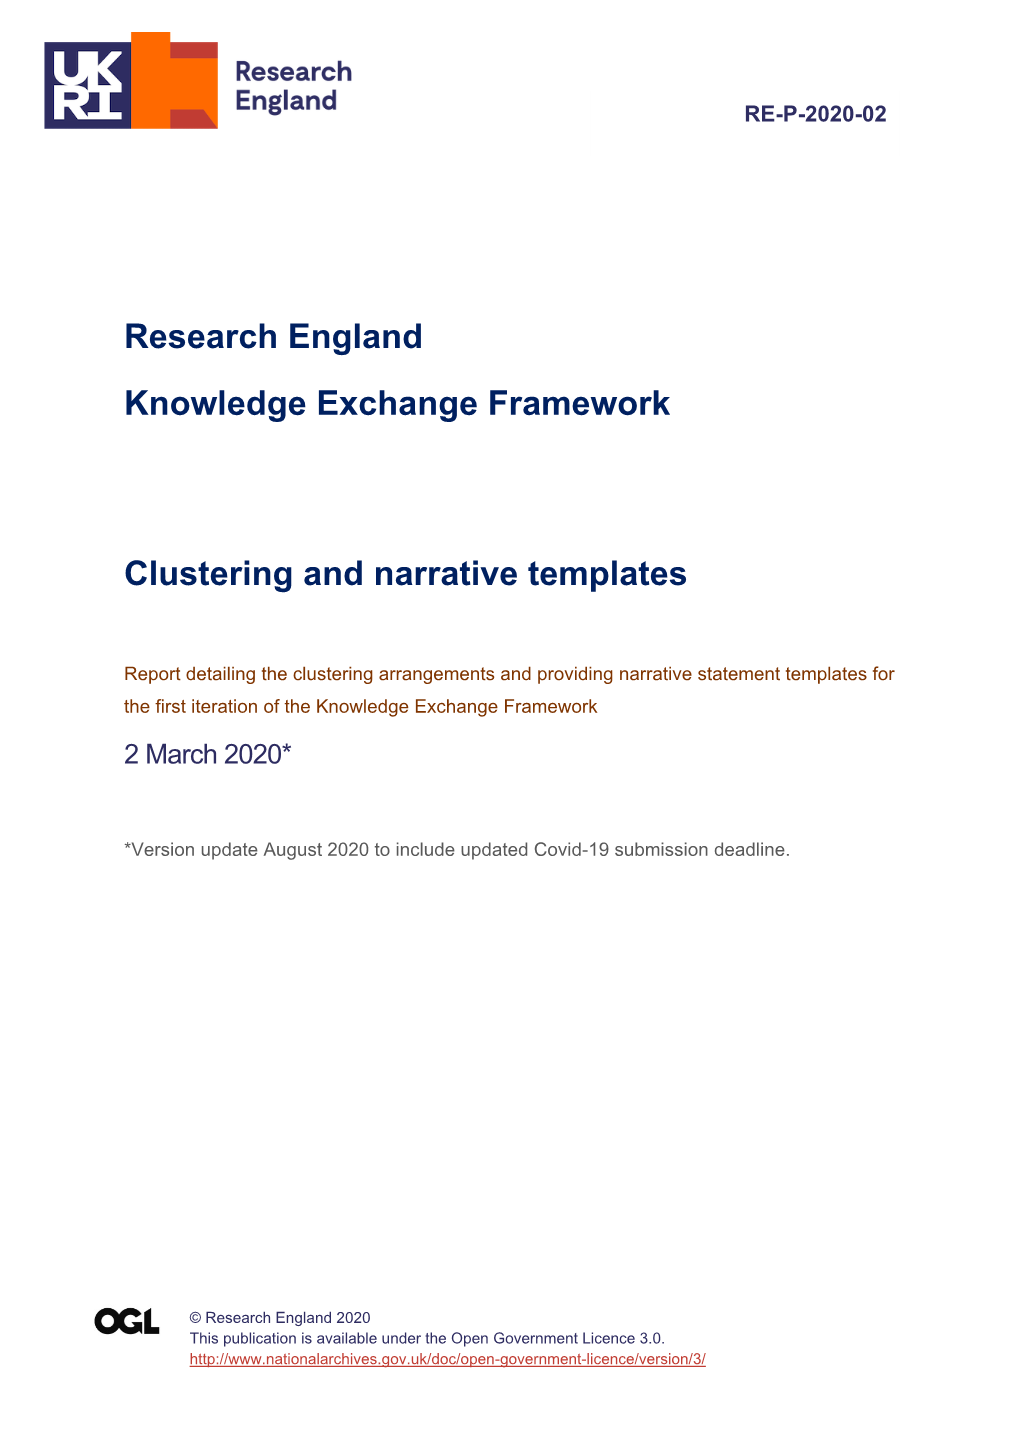 Knowledge Exchange Framework Clustering and Narrative Templates